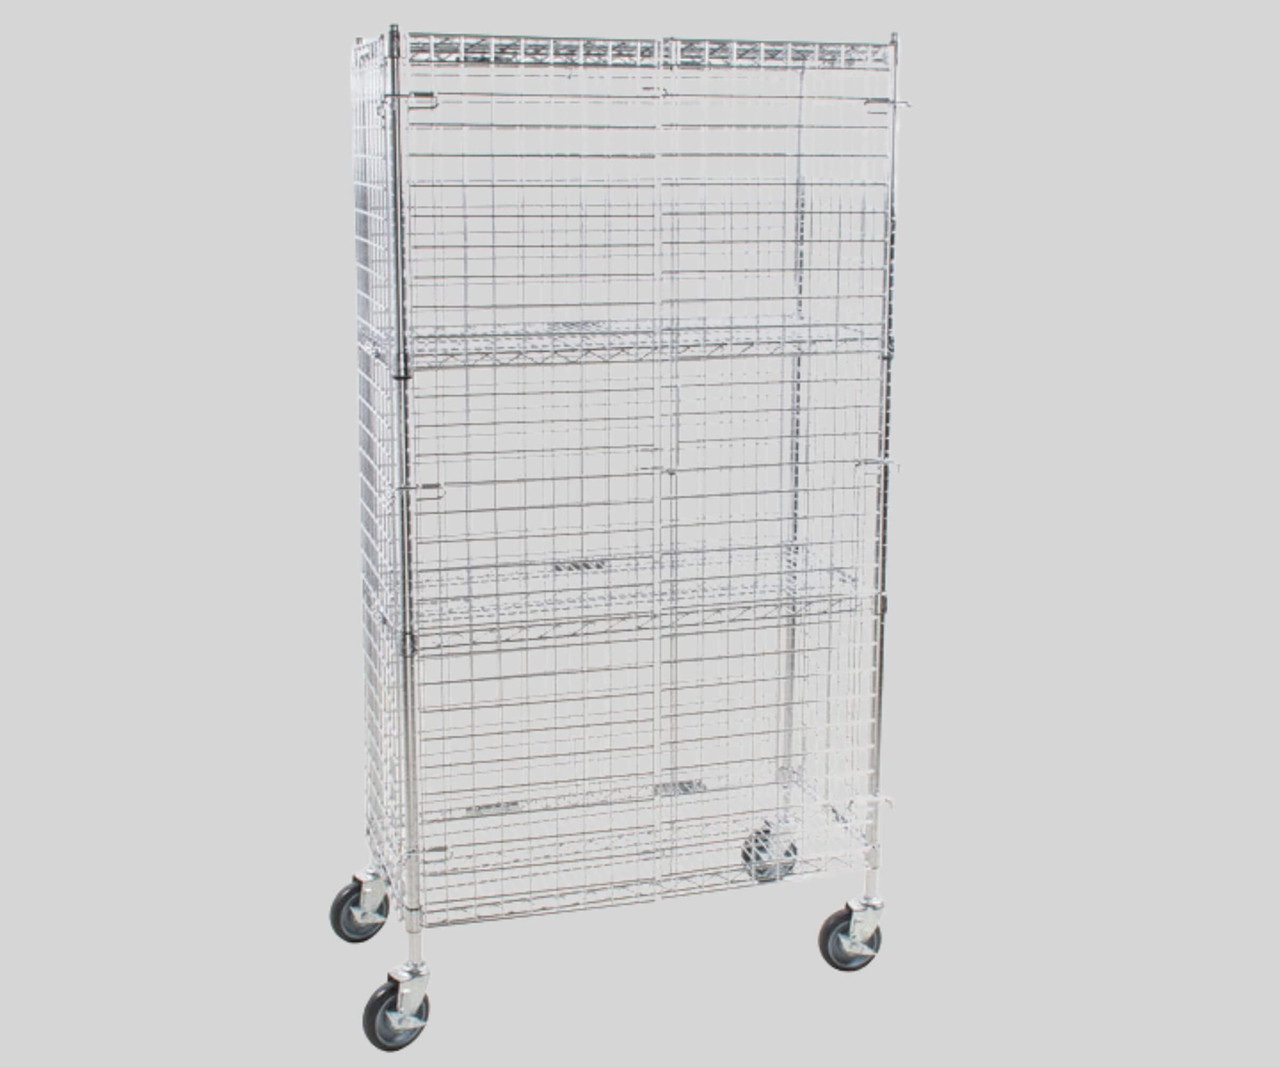 Chicken Pieces CP NSF Mobile Chrome Wire Security Cage Kit - 18" x 36" x 69" | Secure & Portable Storage Solution